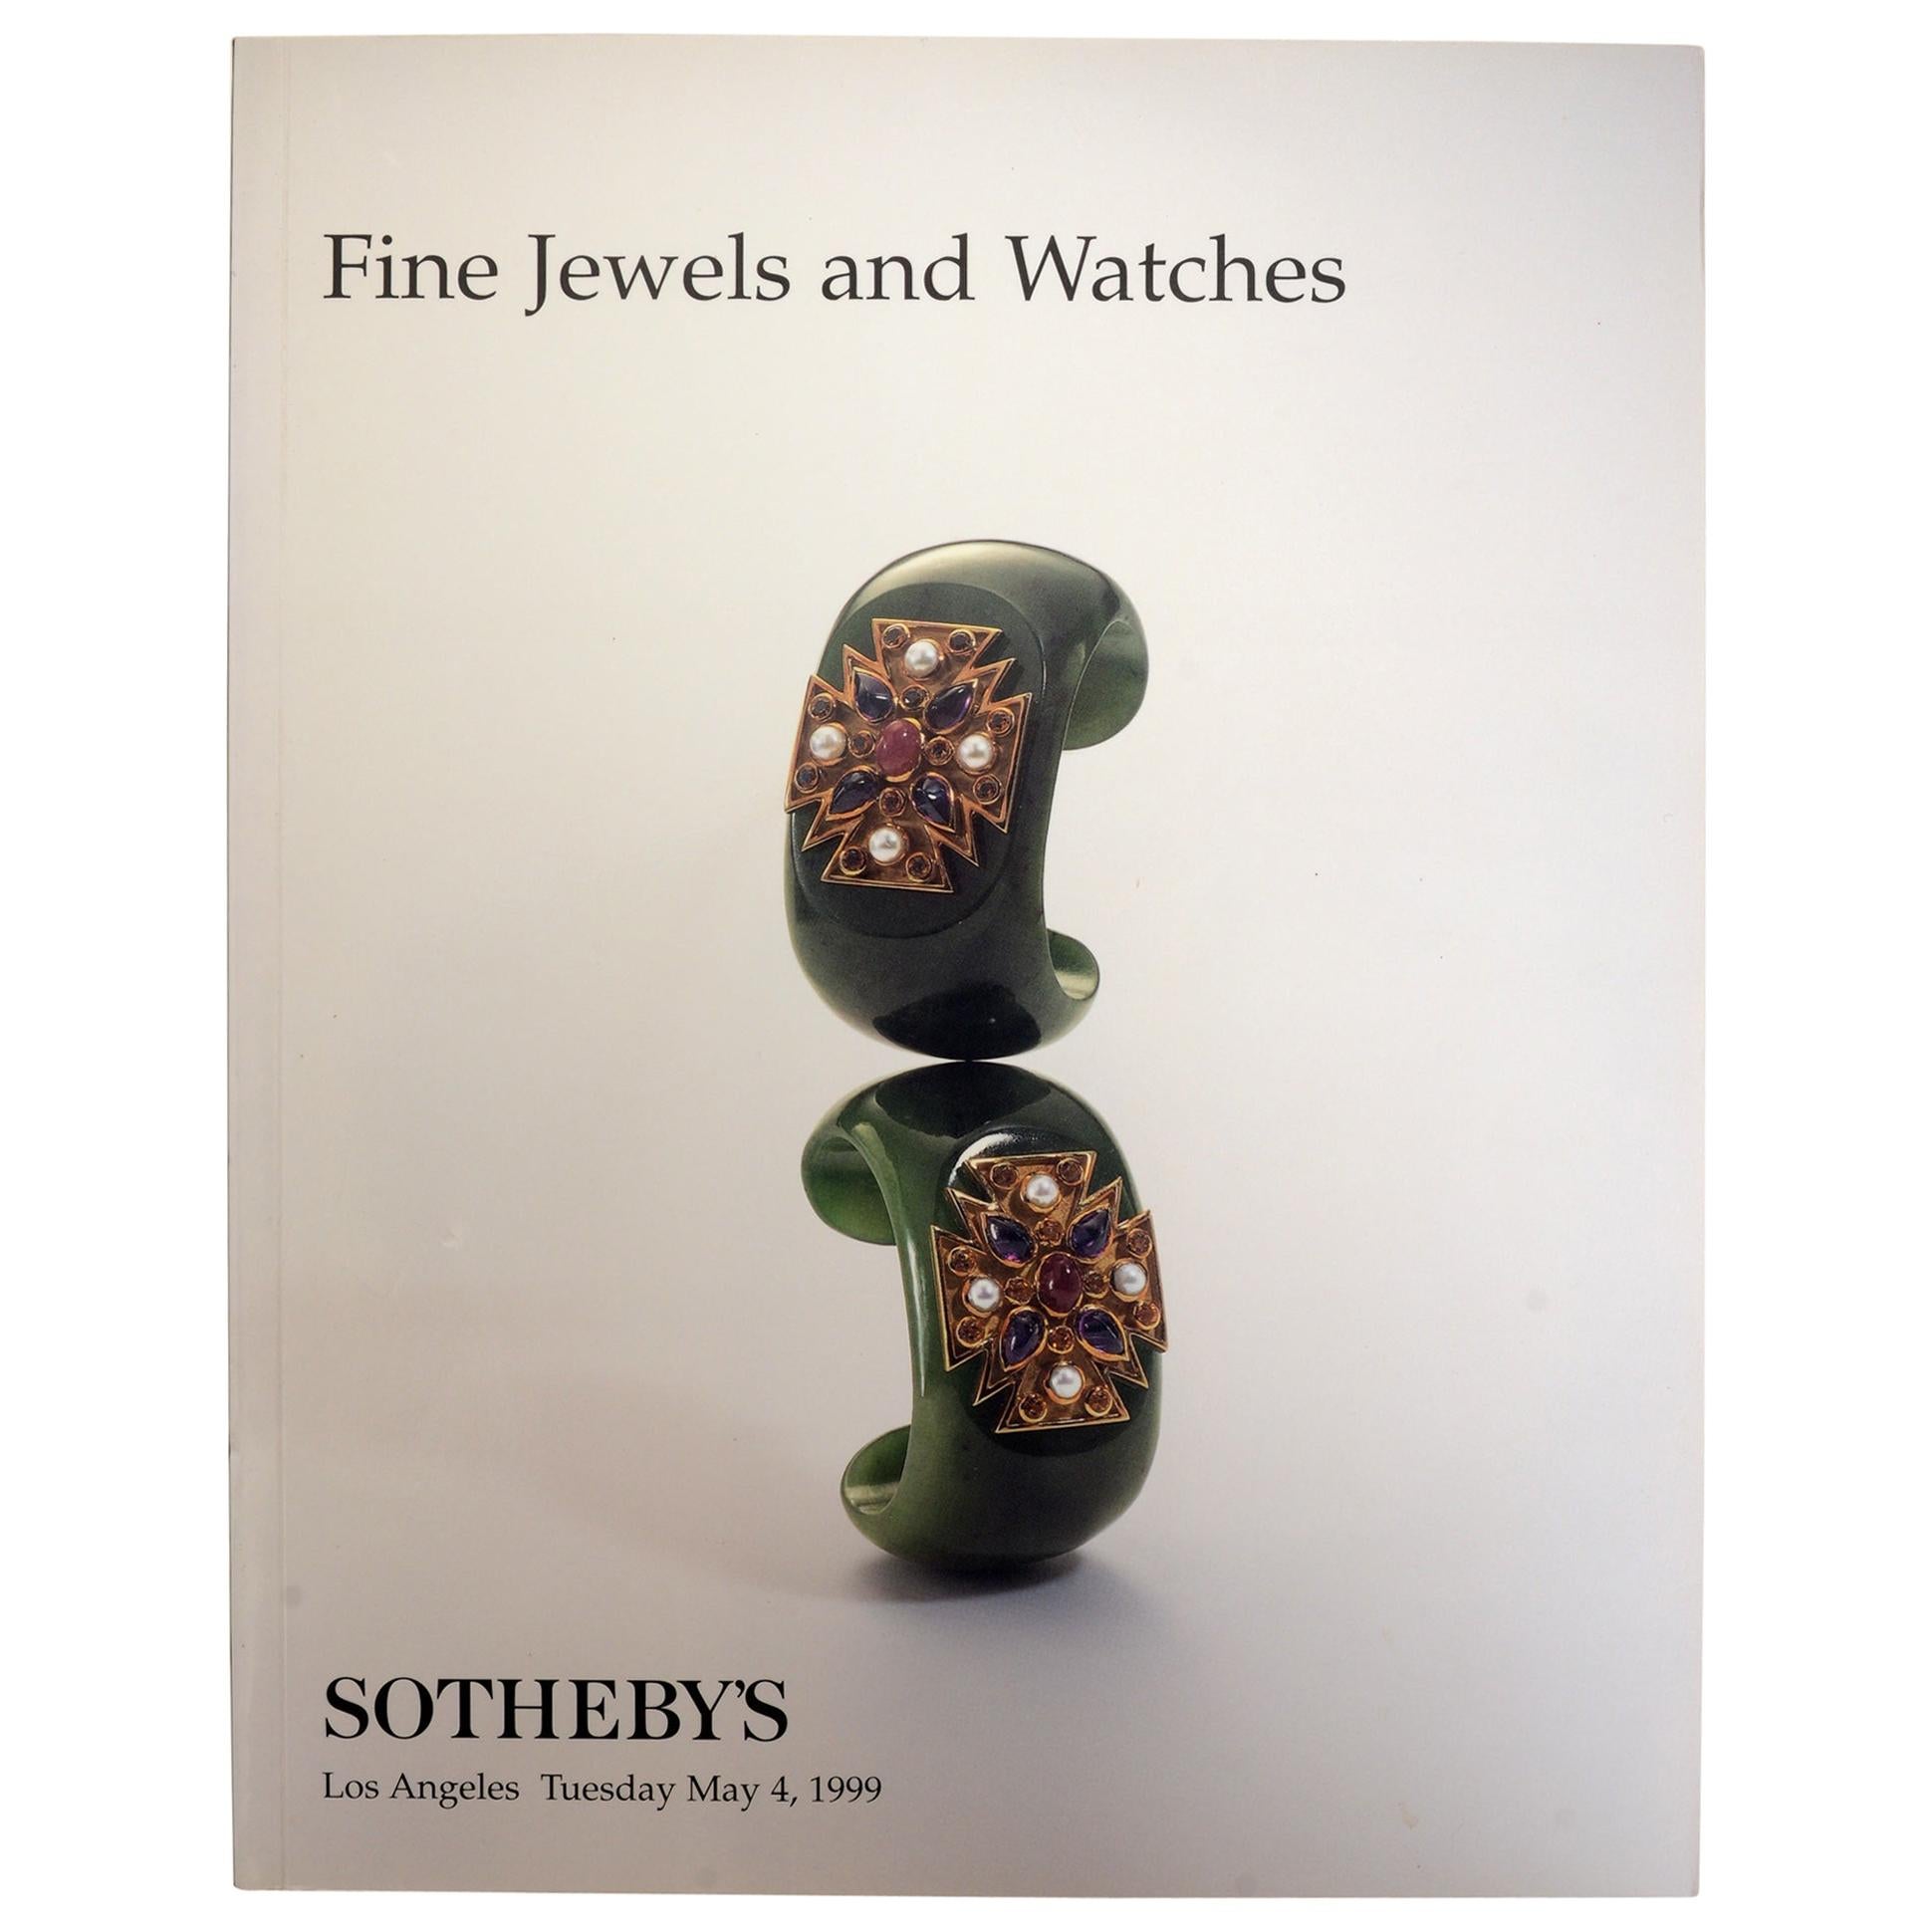 Fine Jewels and Watches. Sotheby's Sale 7312, Los Angeles, May 4, 1999